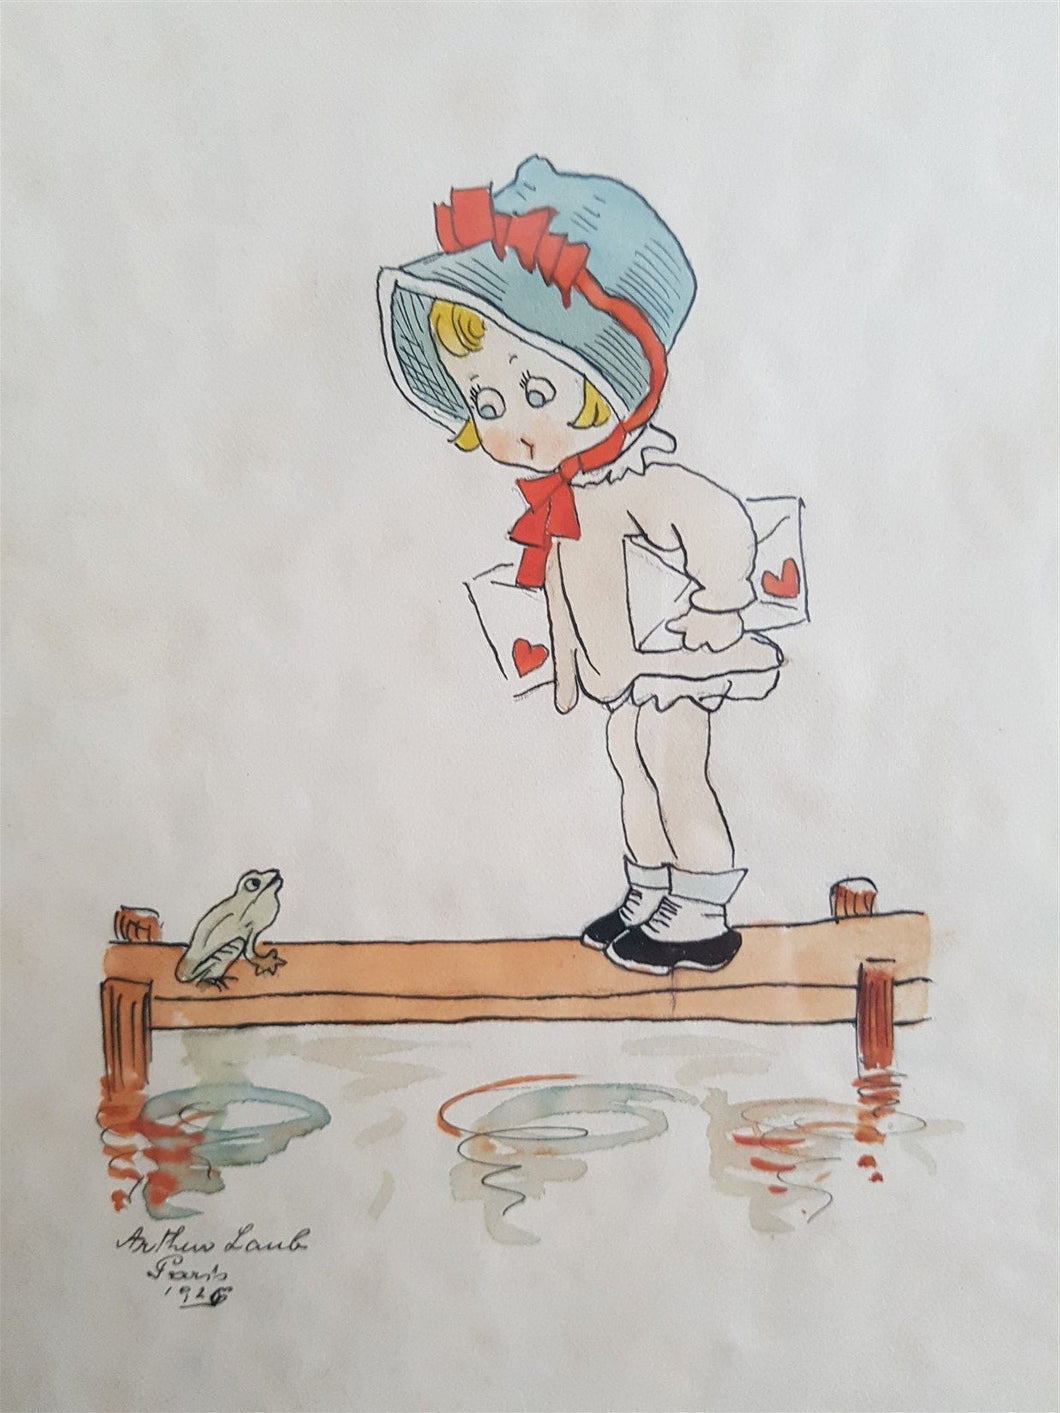 Vintage Sweetheart Watercolor Painting Illustration Drawing Original Art Signed by Artist Arthur Lamb 1926 Girl and Frog in Frame Framed